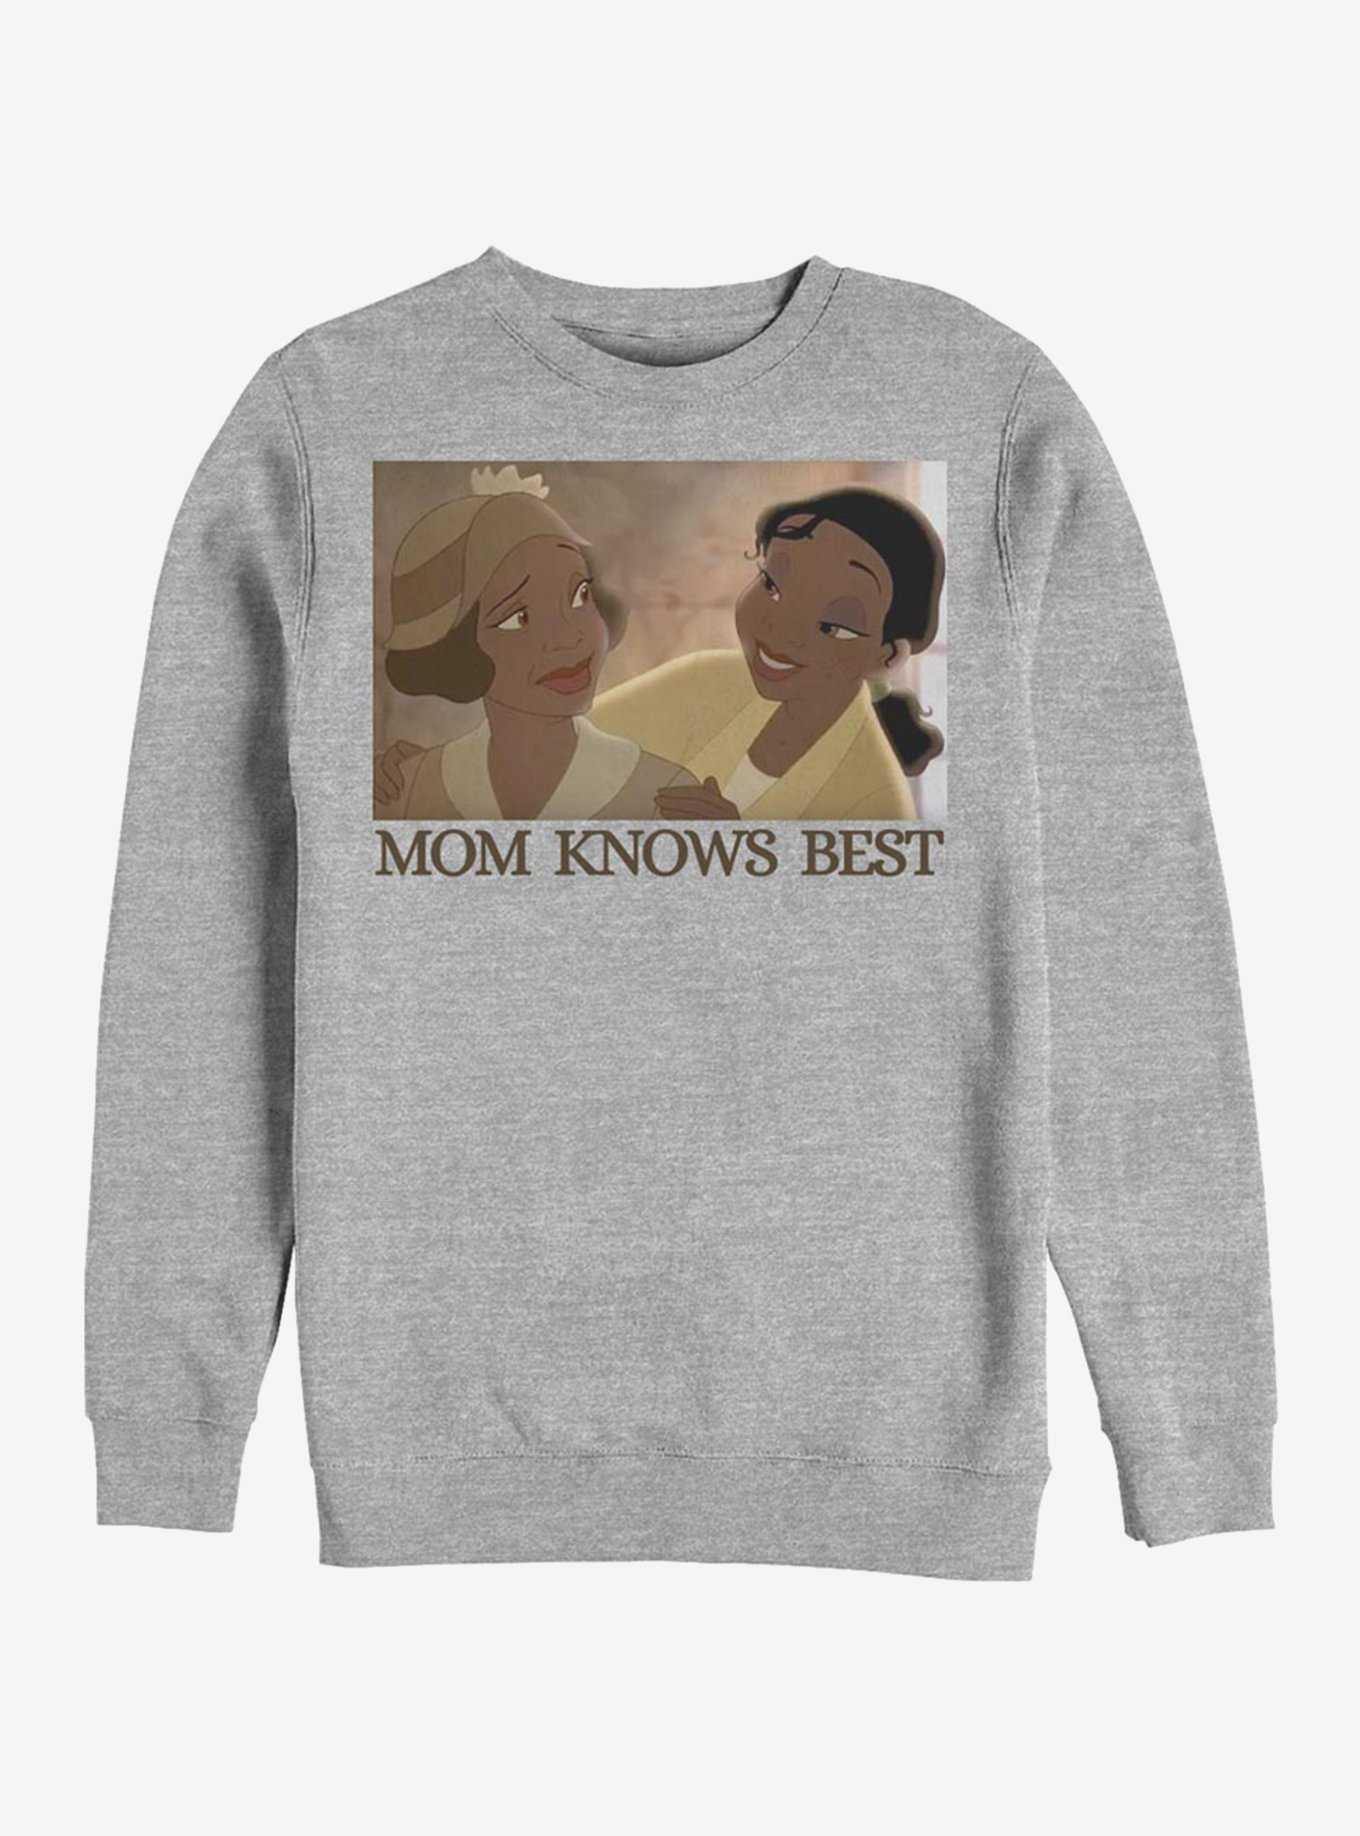 Disney The Princess And The Frog Mom Knows Best Sweatshirt, , hi-res